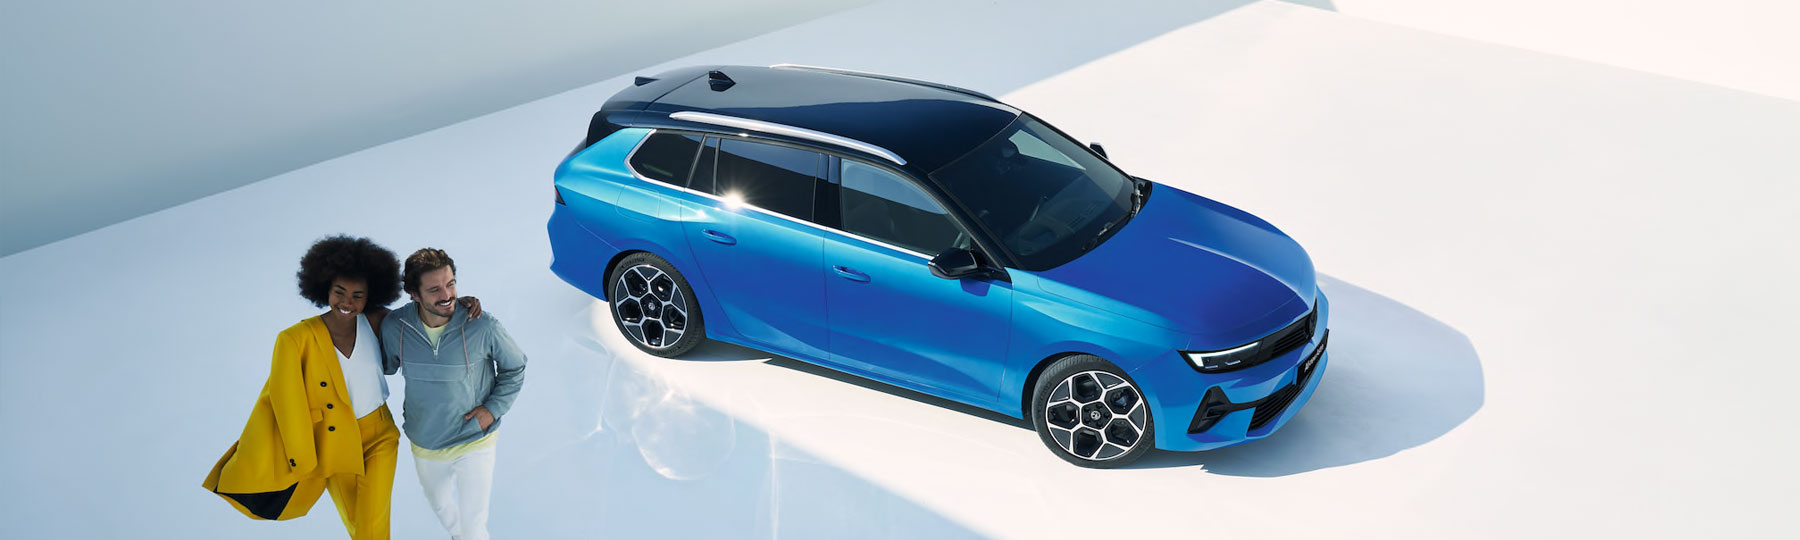 All-New Vauxhall Astra Sports Tourer Business Offer